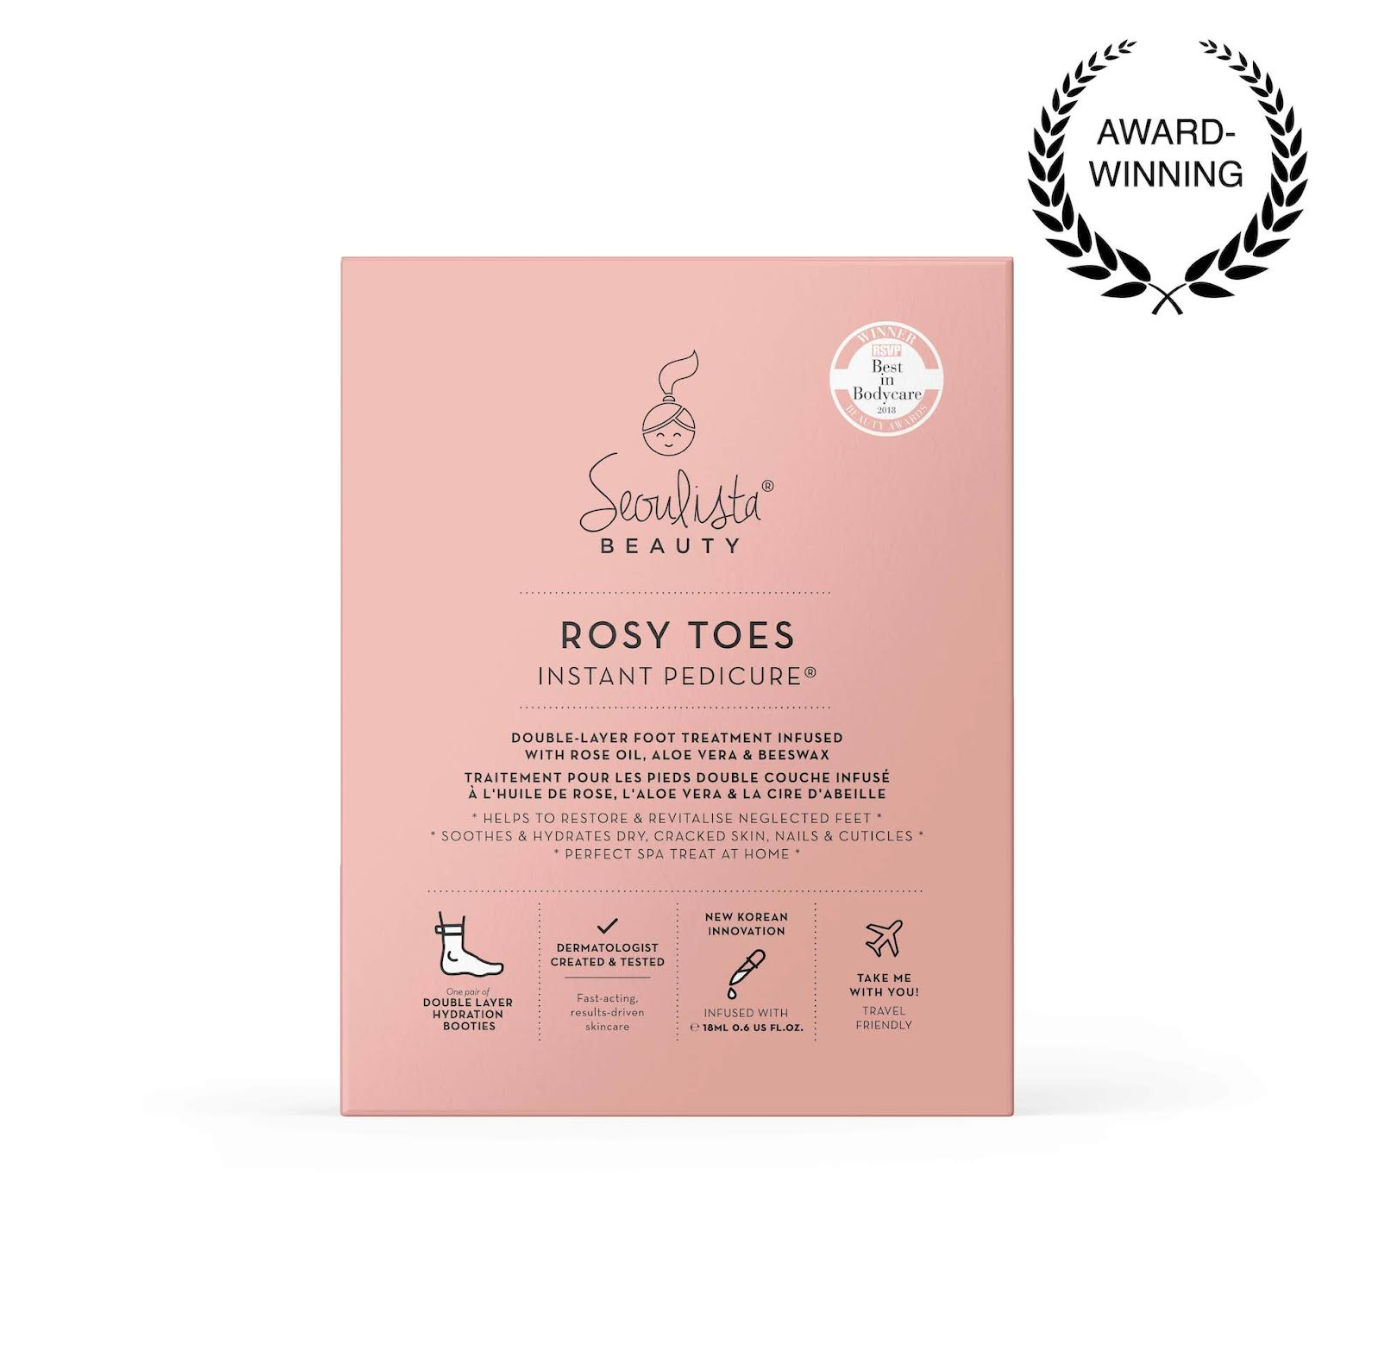 Seoulista Rosy Toes® Instant Pedicure